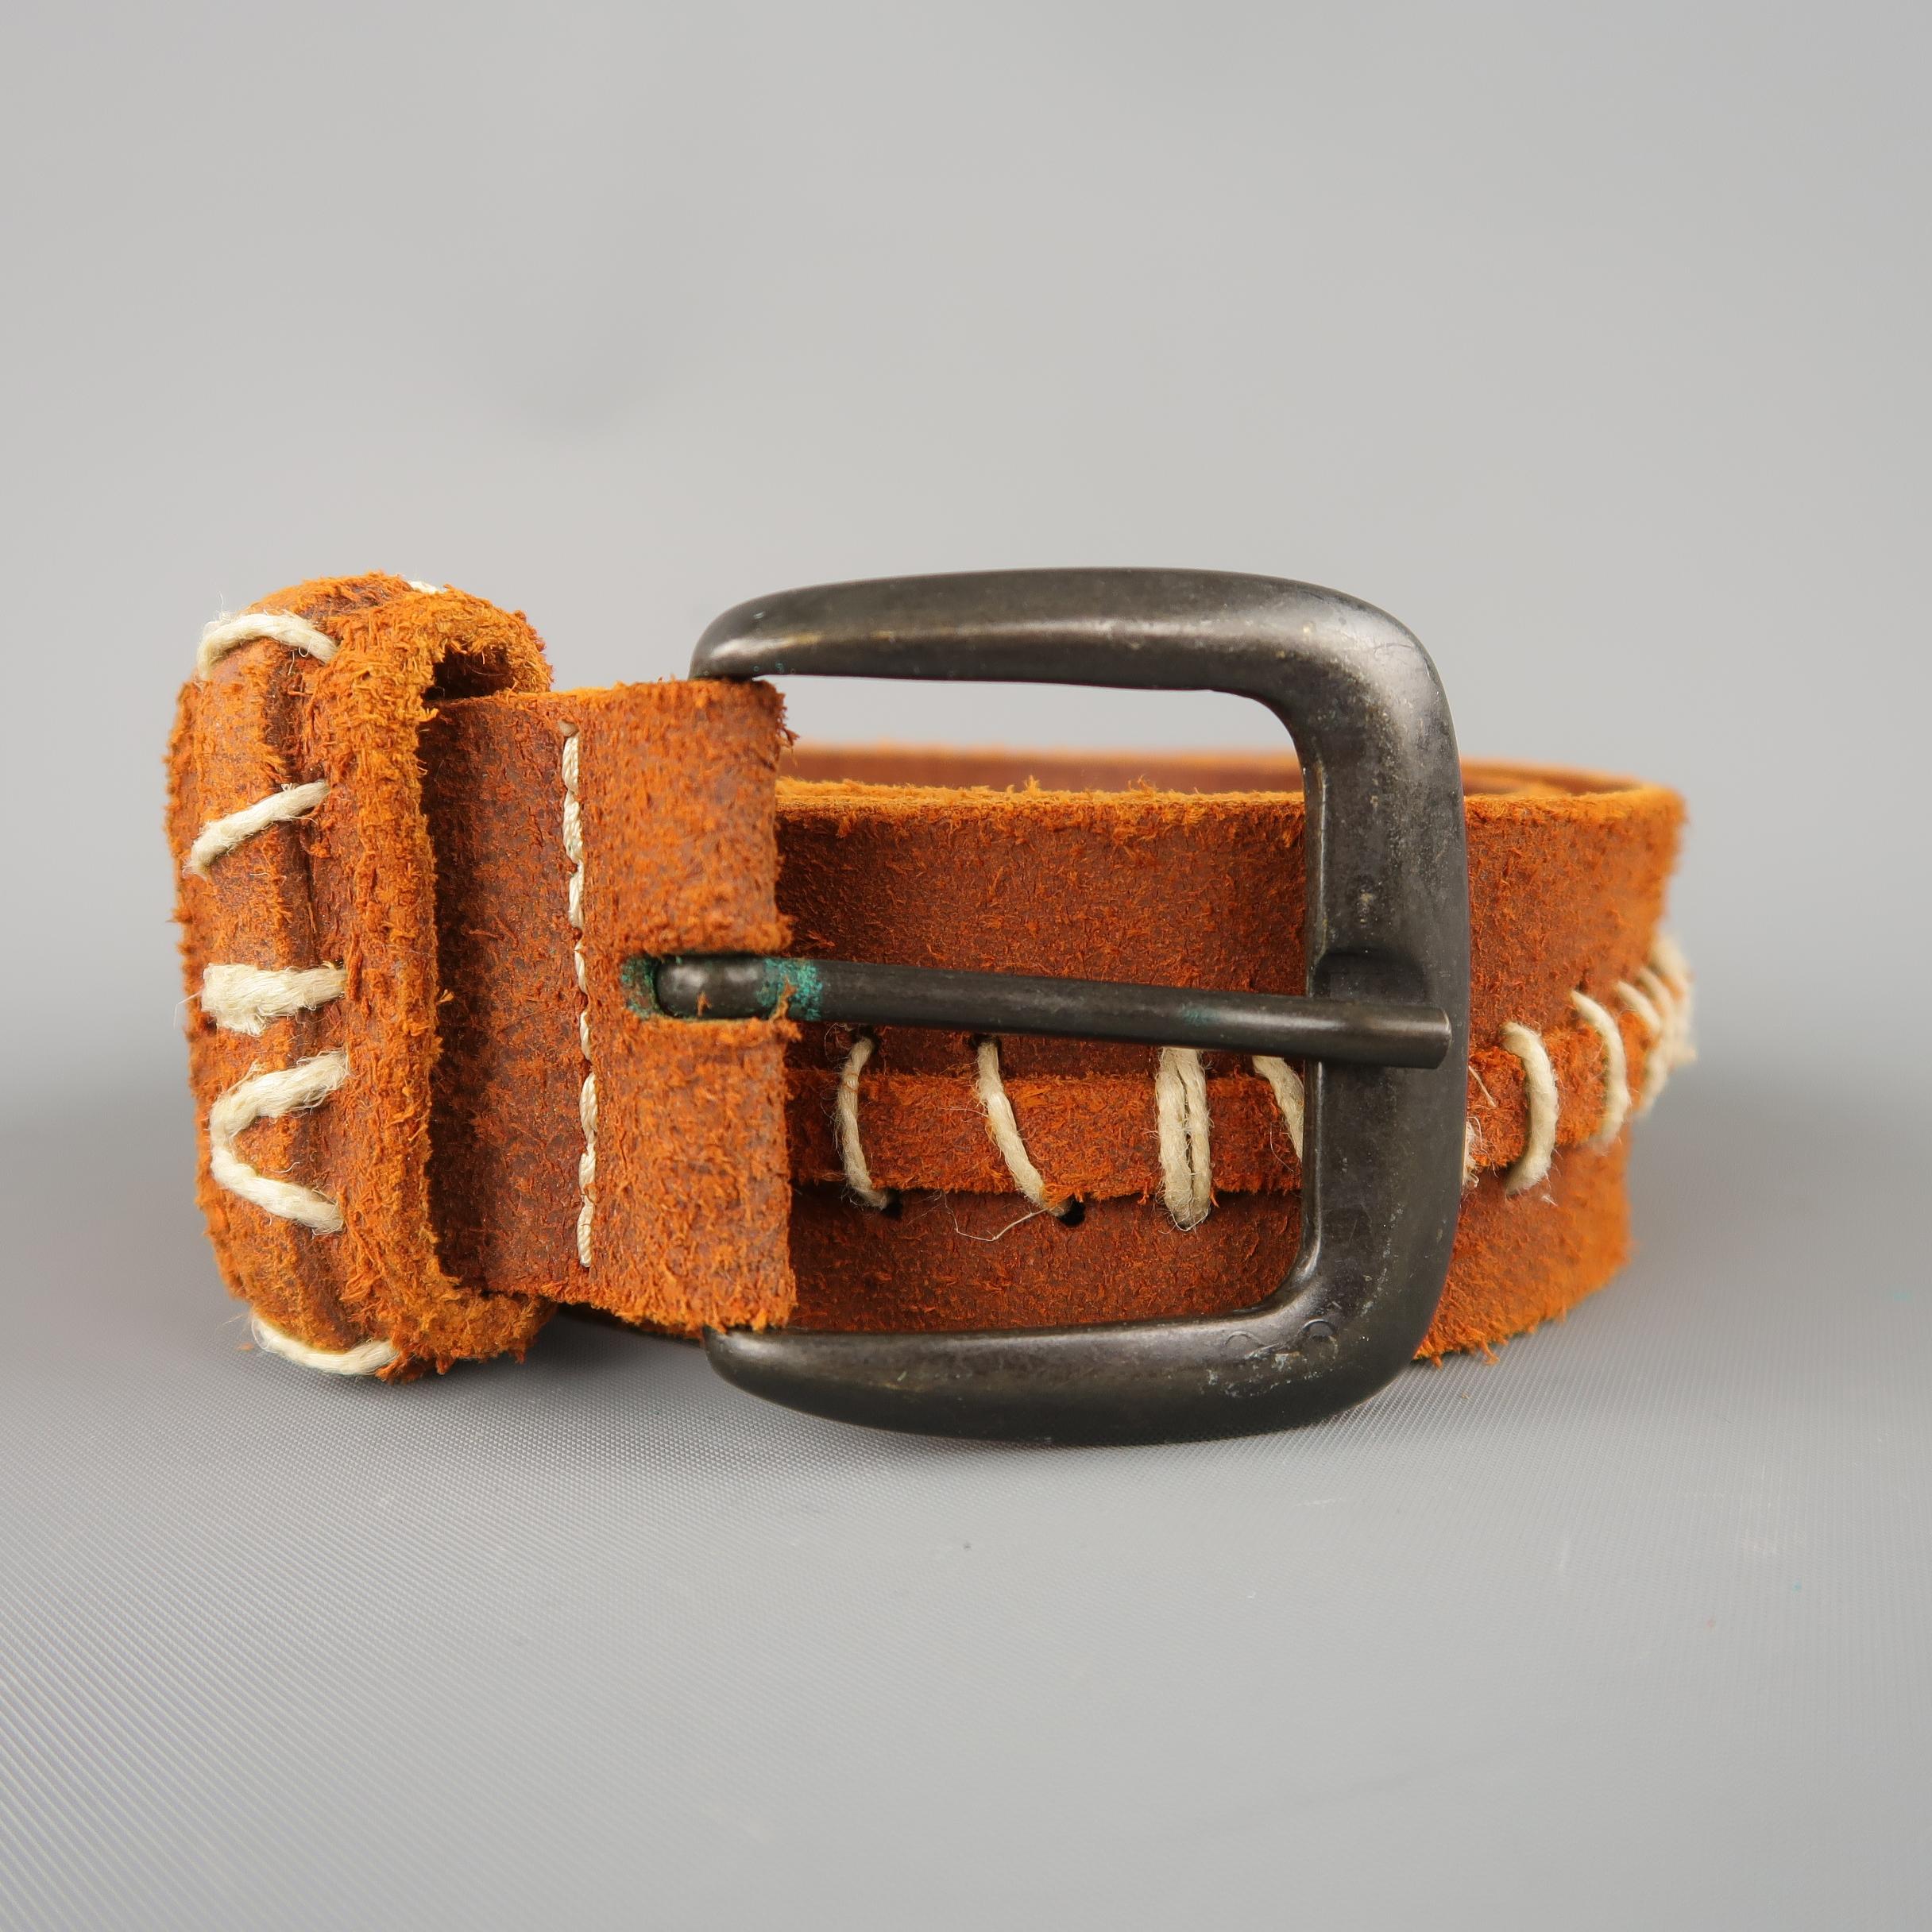 MAISON MARTIN MARGIELA belt comes in brick orange red distressed sueded leather with contrast stitch details throughout and a gunmetal buckle. Made in Italy.
 
Excellent Pre-Owned Condition.
Marked: 90
 
Length: 43.5 in.
Width: 1.5 in.
Fits: